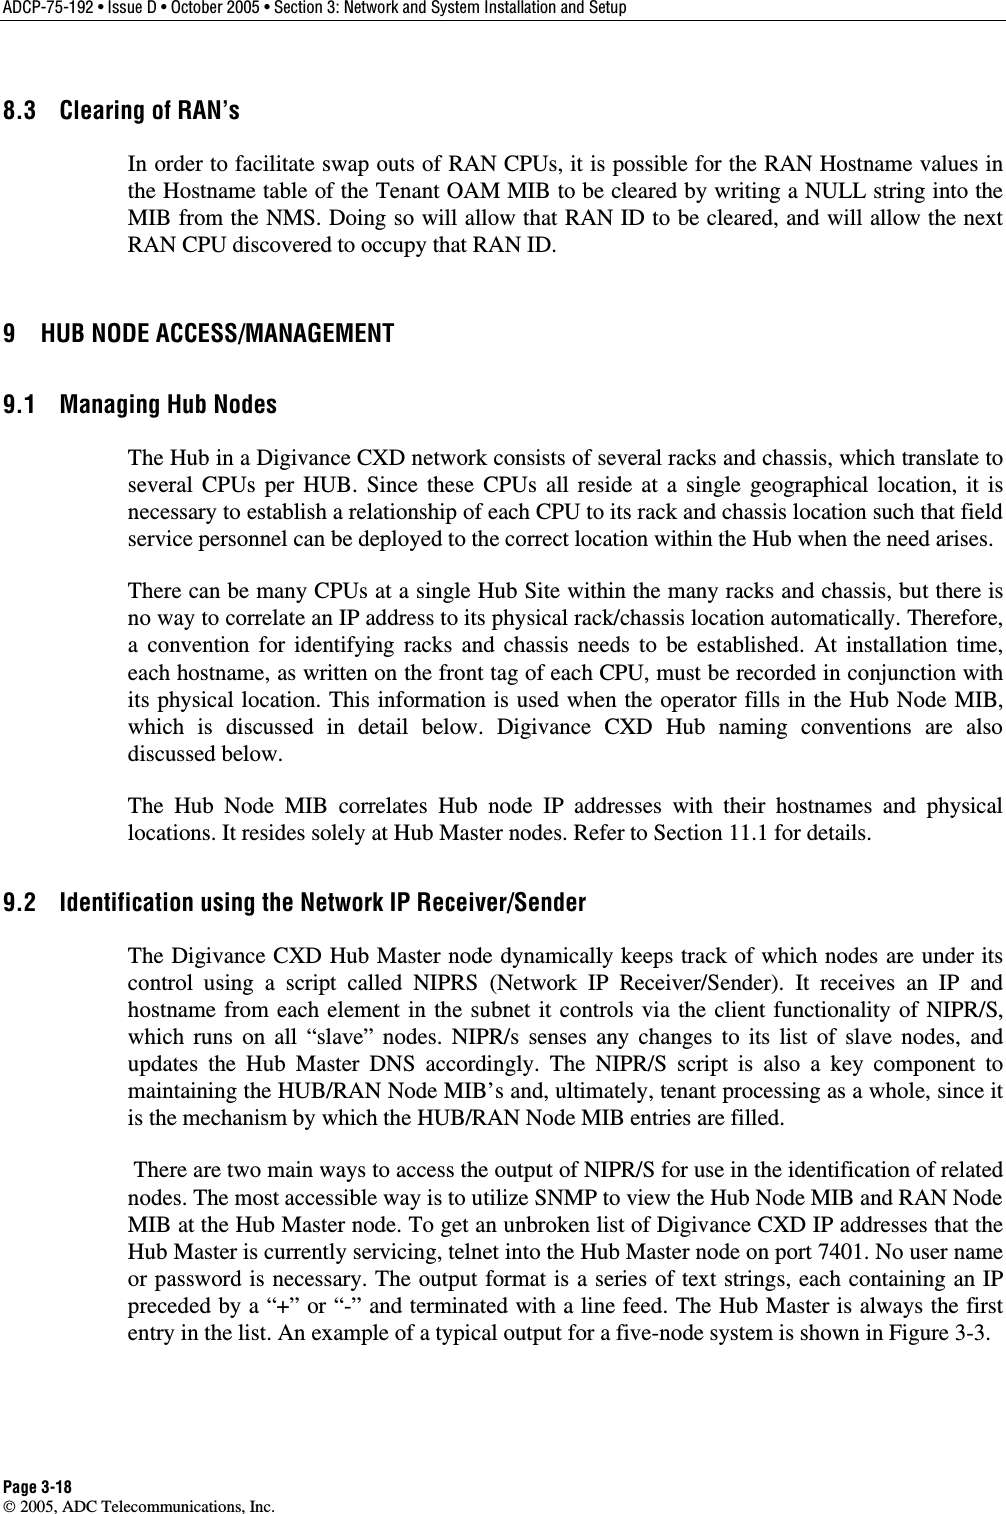 ADCP-75-192 • Issue D • October 2005 • Section 3: Network and System Installation and Setup Page 3-18  2005, ADC Telecommunications, Inc. 8.3  Clearing of RAN’s In order to facilitate swap outs of RAN CPUs, it is possible for the RAN Hostname values in the Hostname table of the Tenant OAM MIB to be cleared by writing a NULL string into the MIB from the NMS. Doing so will allow that RAN ID to be cleared, and will allow the next RAN CPU discovered to occupy that RAN ID. 9  HUB NODE ACCESS/MANAGEMENT 9.1  Managing Hub Nodes The Hub in a Digivance CXD network consists of several racks and chassis, which translate to several CPUs per HUB. Since these CPUs all reside at a single geographical location, it is necessary to establish a relationship of each CPU to its rack and chassis location such that field service personnel can be deployed to the correct location within the Hub when the need arises. There can be many CPUs at a single Hub Site within the many racks and chassis, but there is no way to correlate an IP address to its physical rack/chassis location automatically. Therefore, a convention for identifying racks and chassis needs to be established. At installation time, each hostname, as written on the front tag of each CPU, must be recorded in conjunction with its physical location. This information is used when the operator fills in the Hub Node MIB, which is discussed in detail below. Digivance CXD Hub naming conventions are also discussed below. The Hub Node MIB correlates Hub node IP addresses with their hostnames and physical locations. It resides solely at Hub Master nodes. Refer to Section 11.1 for details.  9.2  Identification using the Network IP Receiver/Sender The Digivance CXD Hub Master node dynamically keeps track of which nodes are under its control using a script called NIPRS (Network IP Receiver/Sender). It receives an IP and hostname from each element in the subnet it controls via the client functionality of NIPR/S, which runs on all “slave” nodes. NIPR/s senses any changes to its list of slave nodes, and updates the Hub Master DNS accordingly. The NIPR/S script is also a key component to maintaining the HUB/RAN Node MIB’s and, ultimately, tenant processing as a whole, since it is the mechanism by which the HUB/RAN Node MIB entries are filled.  There are two main ways to access the output of NIPR/S for use in the identification of related nodes. The most accessible way is to utilize SNMP to view the Hub Node MIB and RAN Node MIB at the Hub Master node. To get an unbroken list of Digivance CXD IP addresses that the Hub Master is currently servicing, telnet into the Hub Master node on port 7401. No user name or password is necessary. The output format is a series of text strings, each containing an IP preceded by a “+” or “-” and terminated with a line feed. The Hub Master is always the first entry in the list. An example of a typical output for a five-node system is shown in Figure 3-3.  